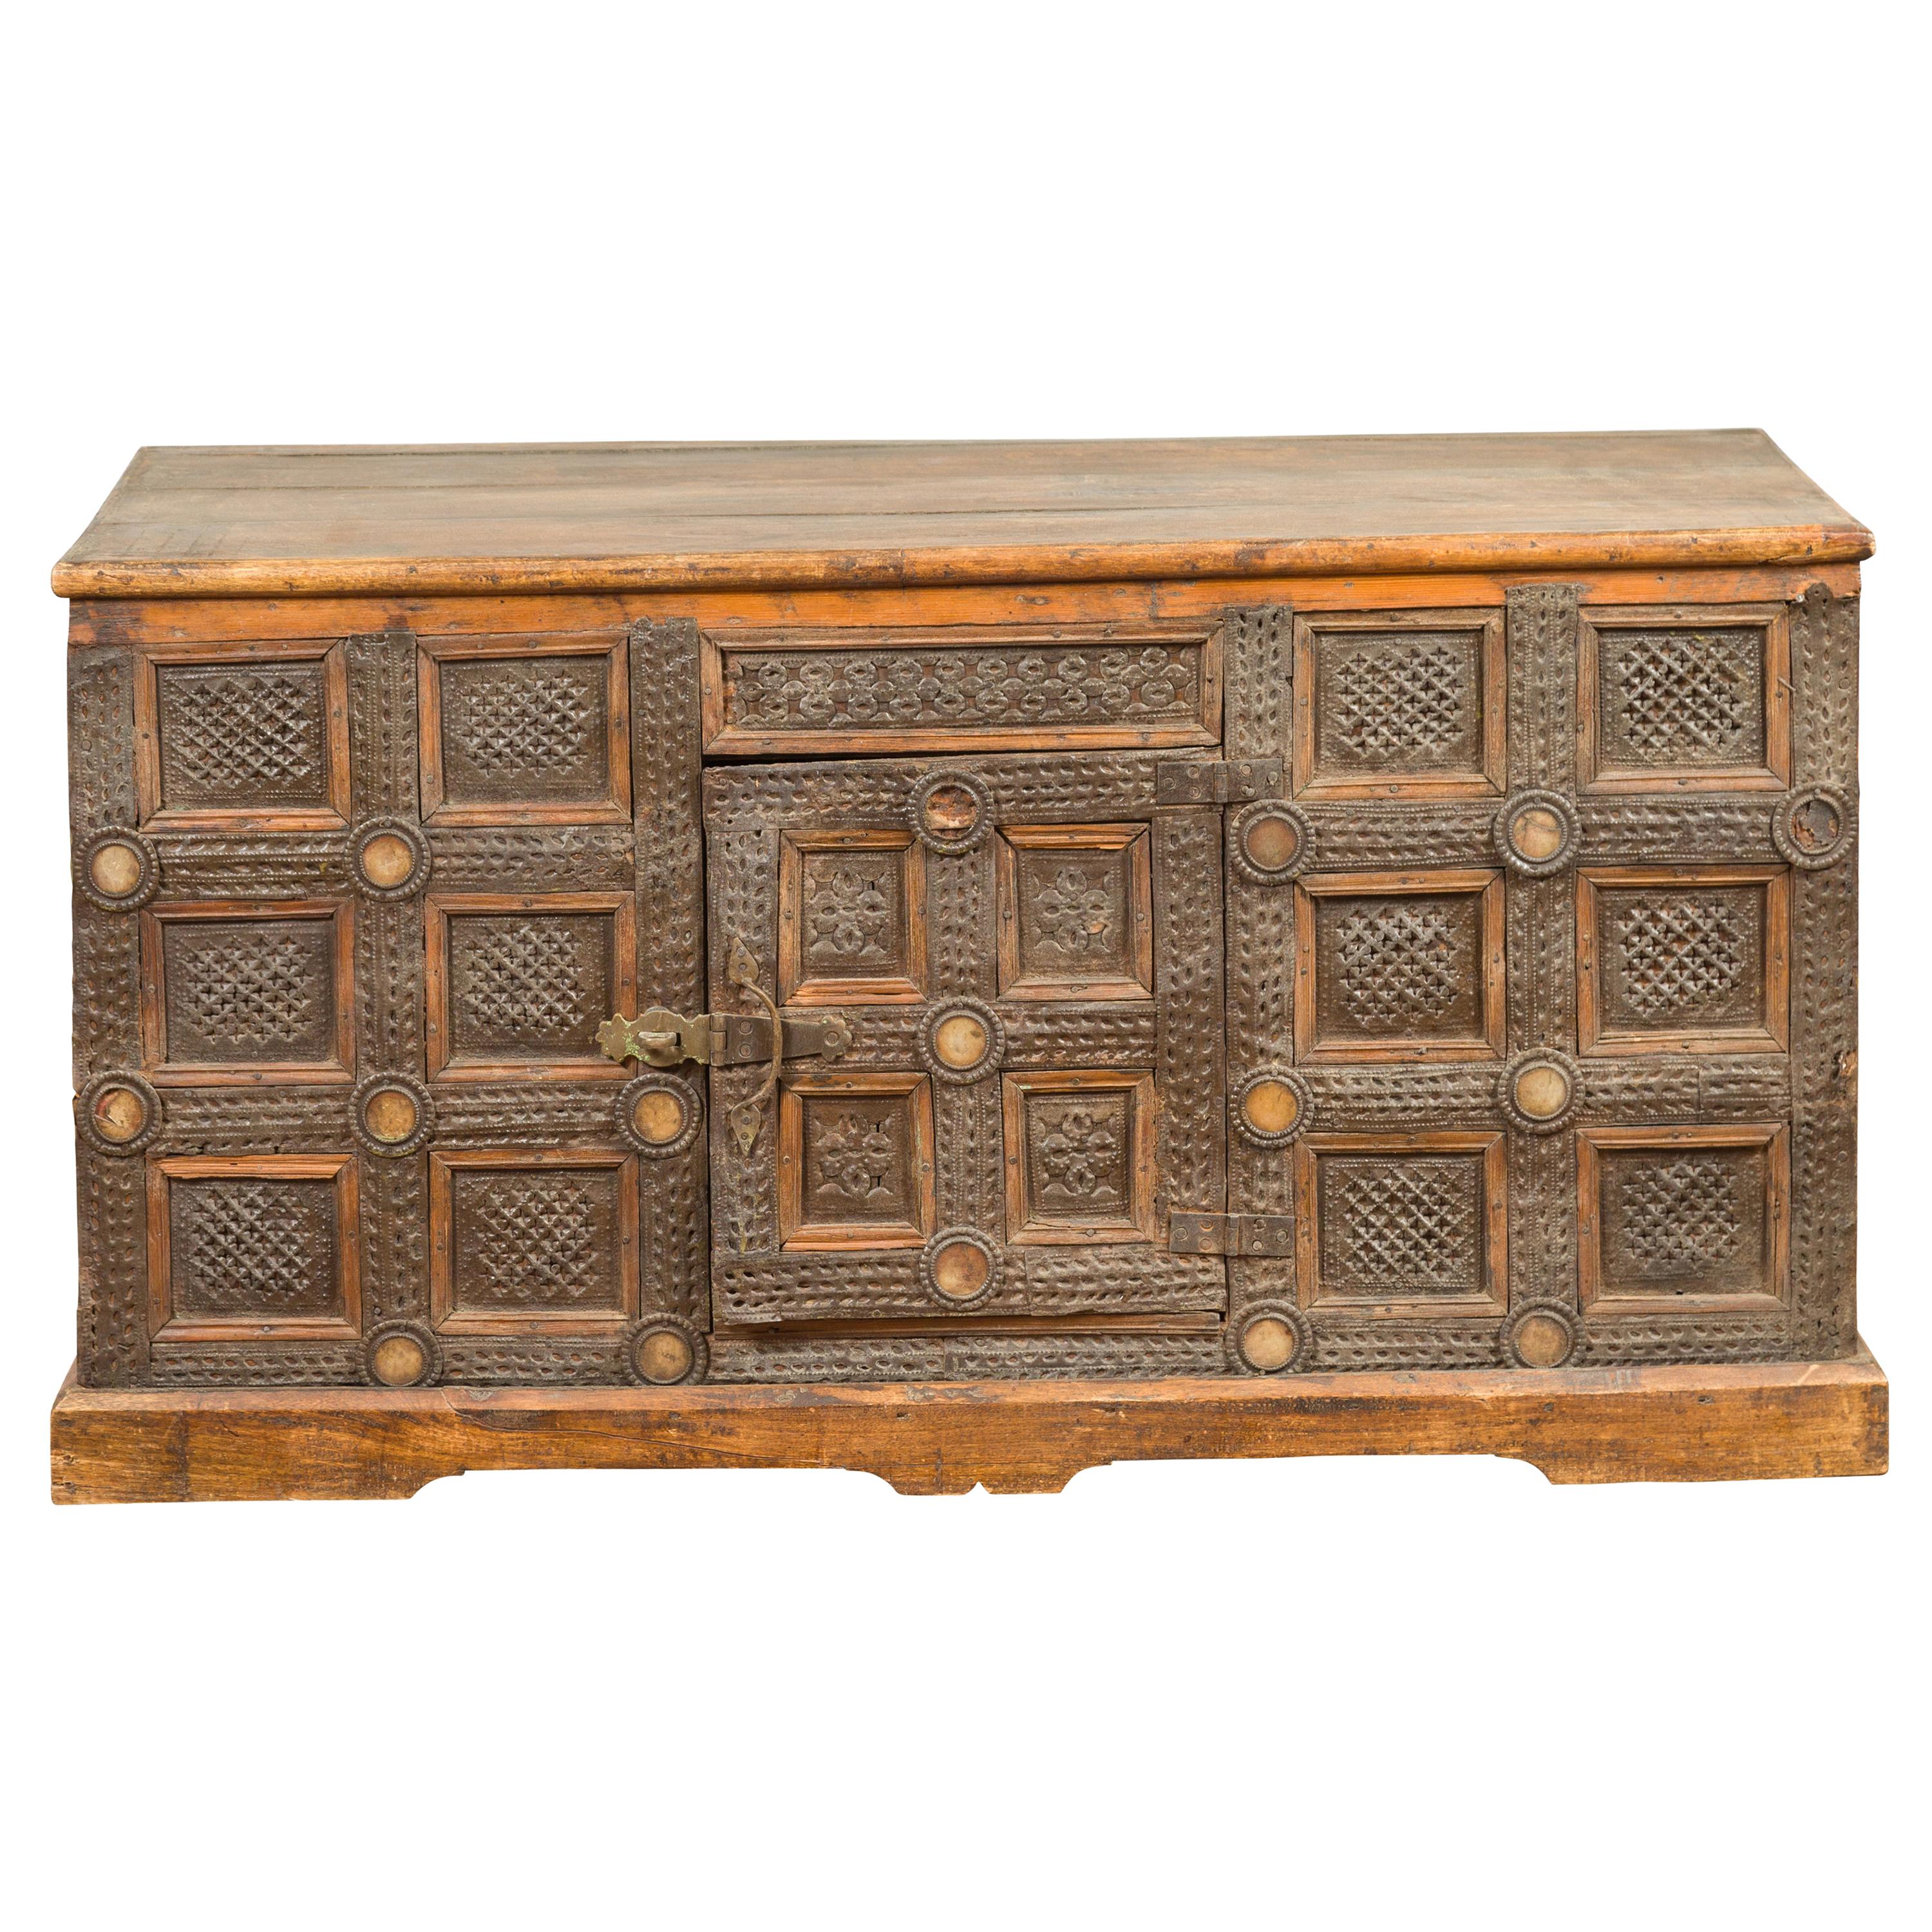 Indian Vintage Wood and Metal Cabinet with Geometric Decor